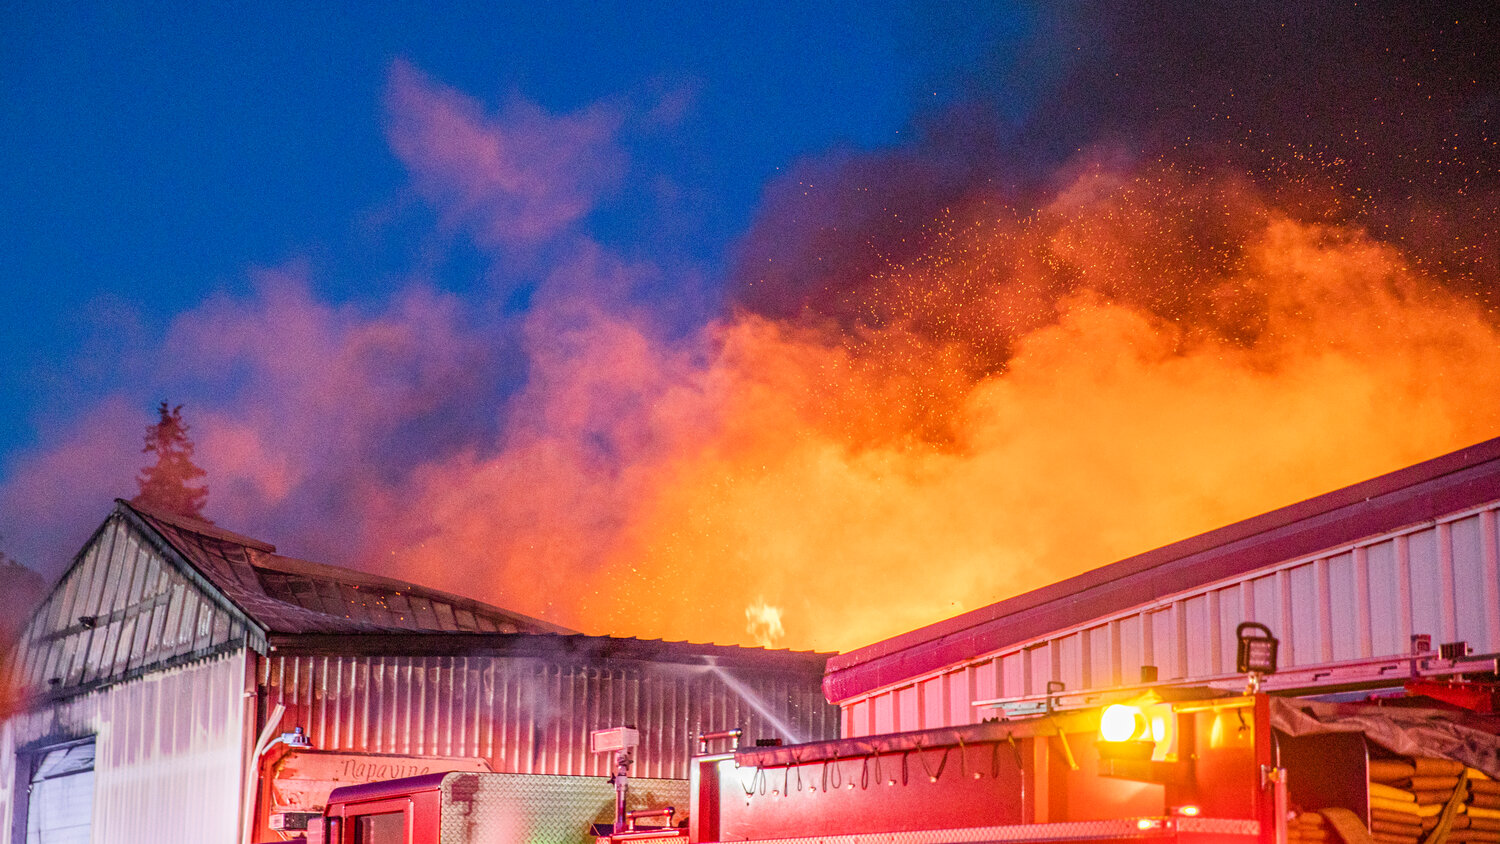 A massive blaze escapes the roof of an aluminum storage building in downtown Napavine on Saturday, June 3.